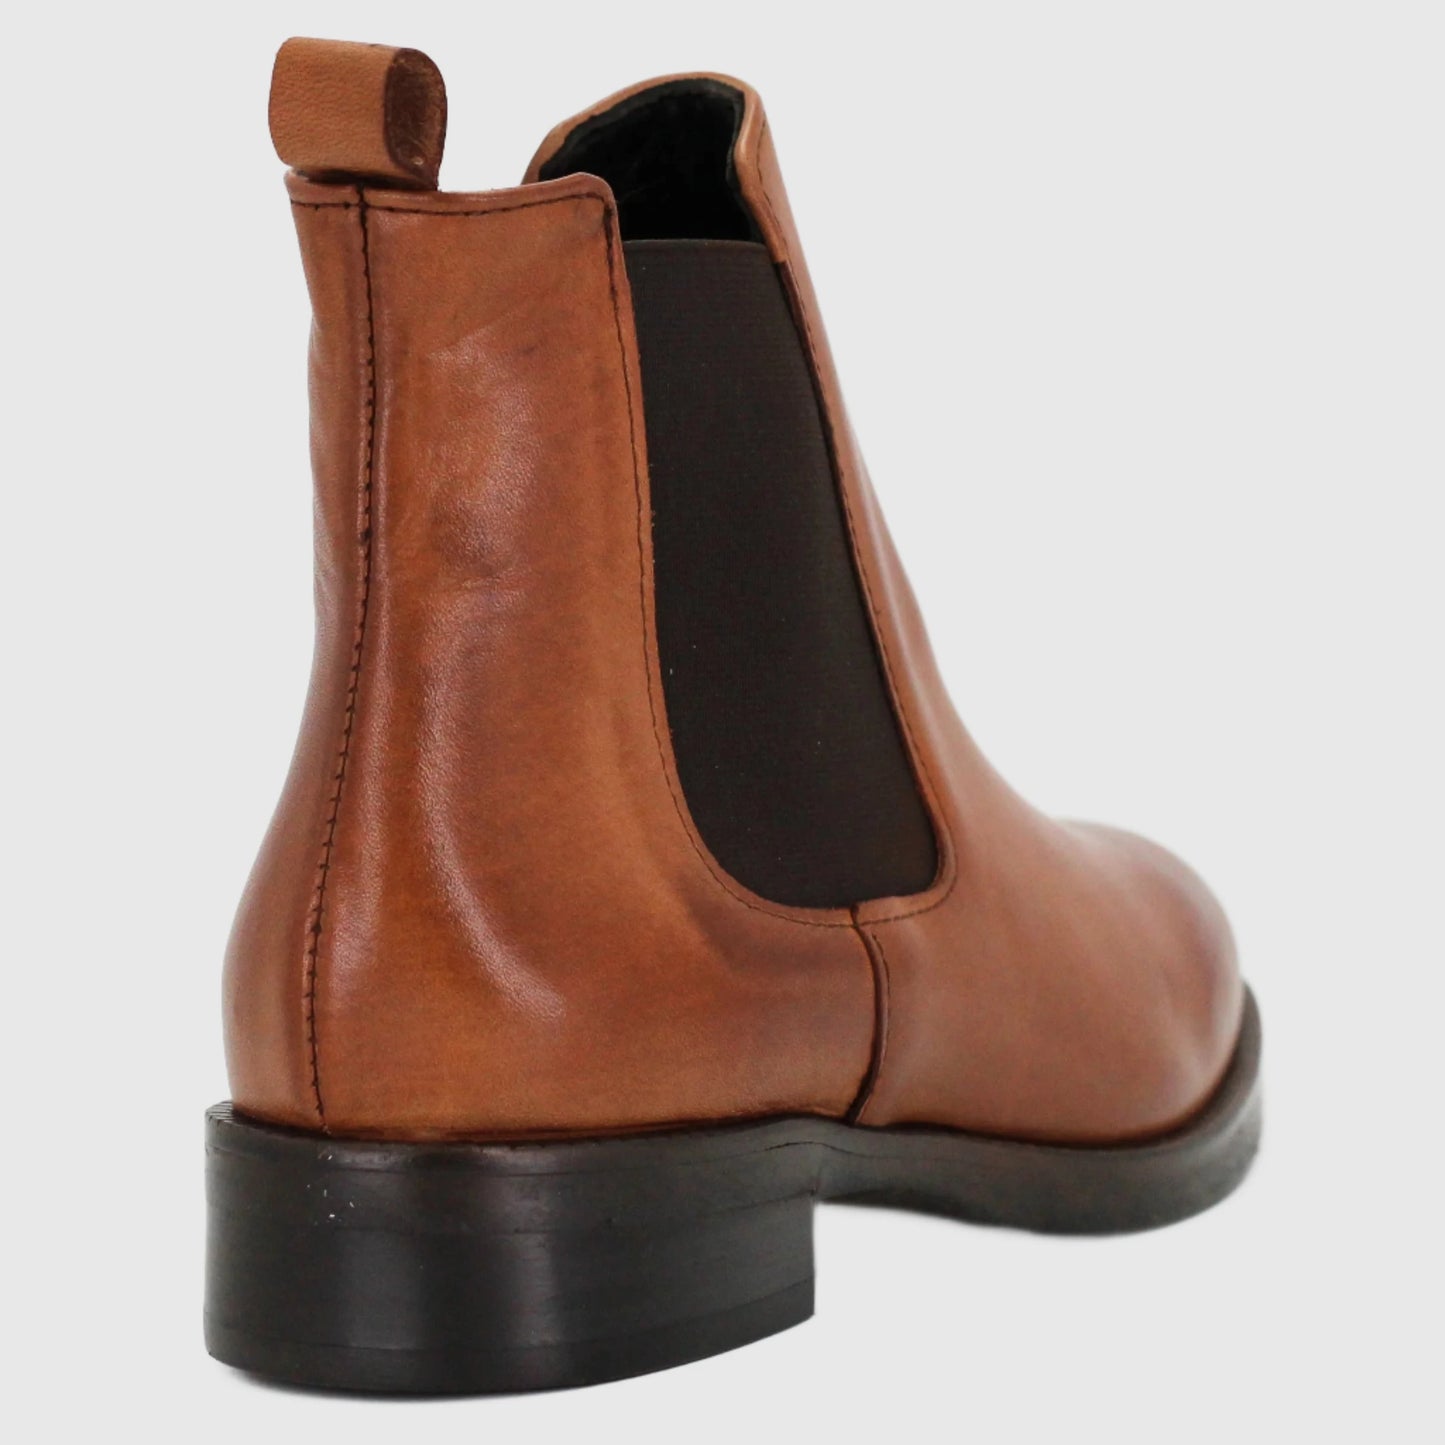 Shop Handmade Italian Leather helsea boot in cuoio (GC2030) or browse our range of hand-made Italian shoes in leather or suede in-store at Aliverti Cape Town, or shop online. We deliver in South Africa & offer multiple payment plans as well as accept multiple safe & secure payment methods.